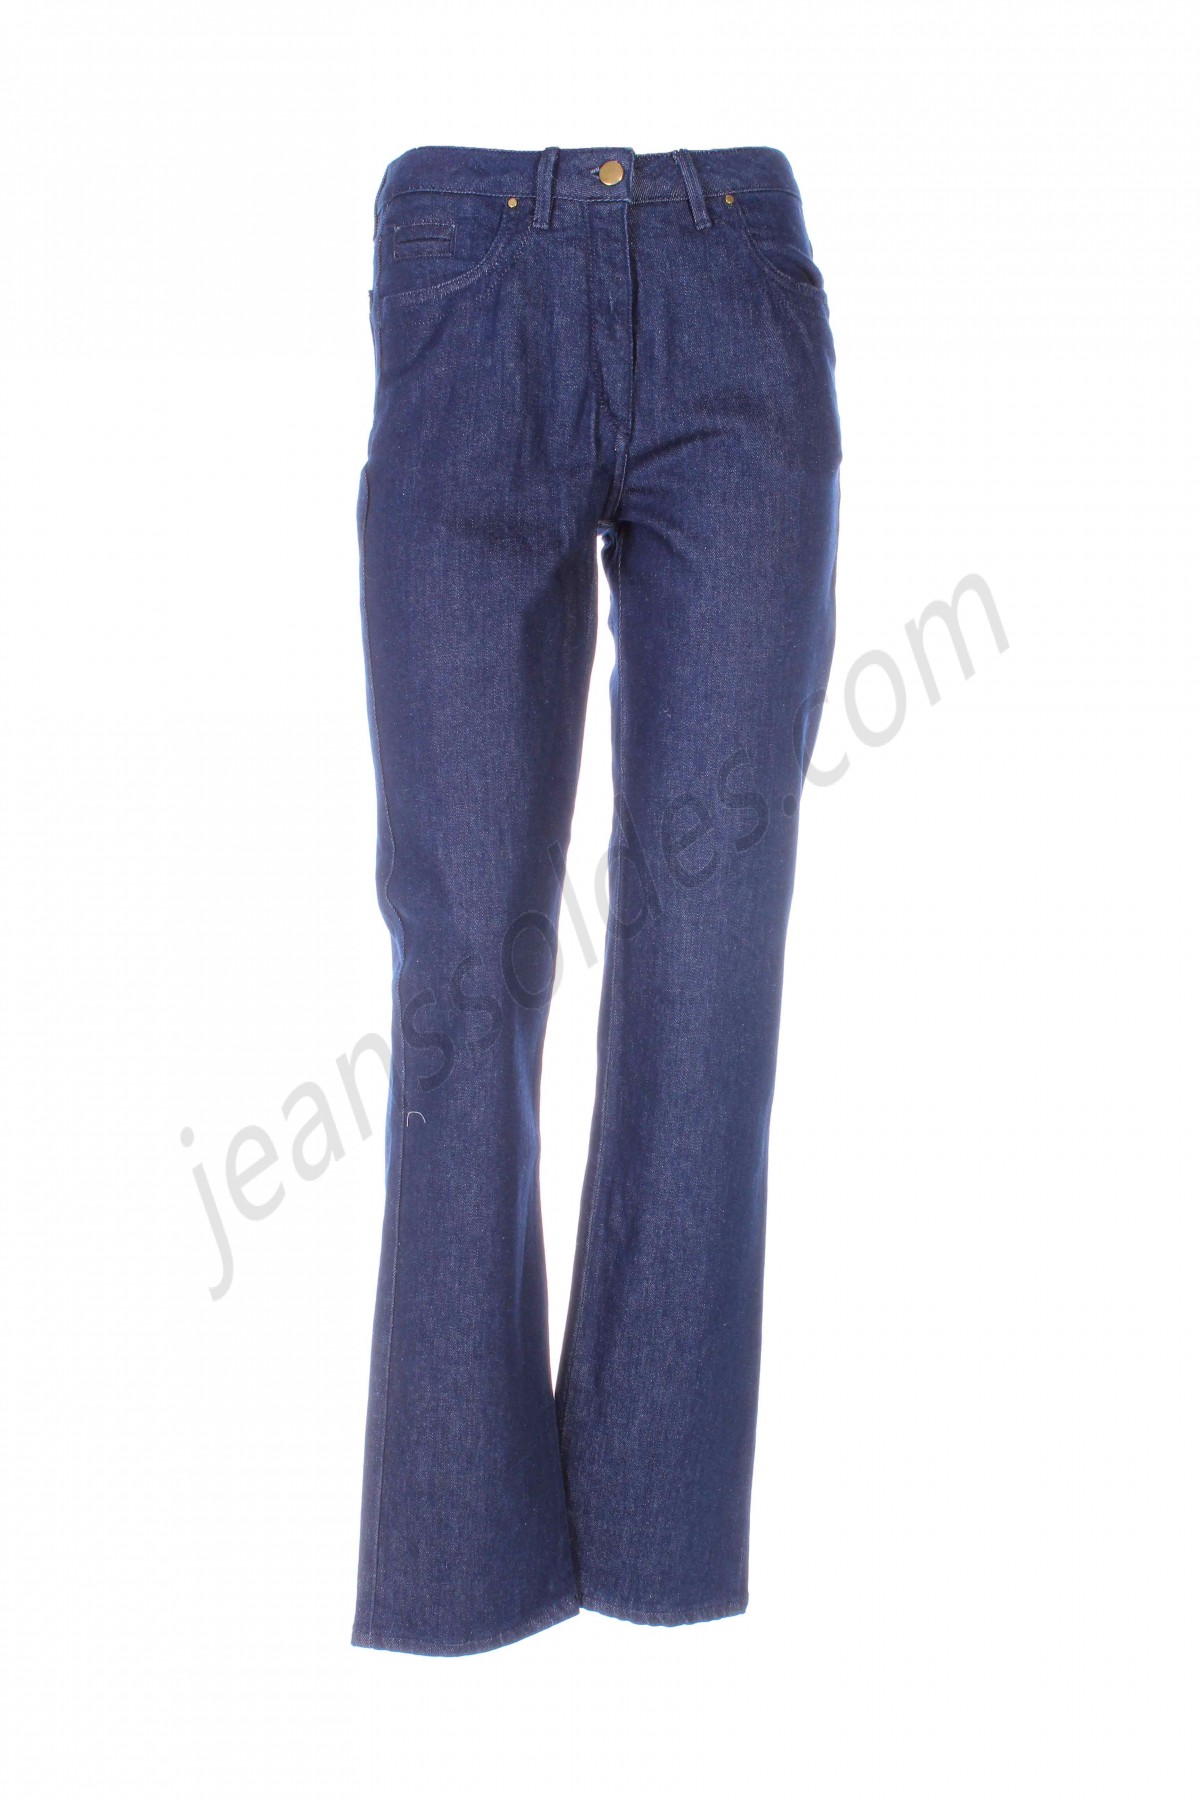 weill-Jeans coupe slim prix d’amis - -0